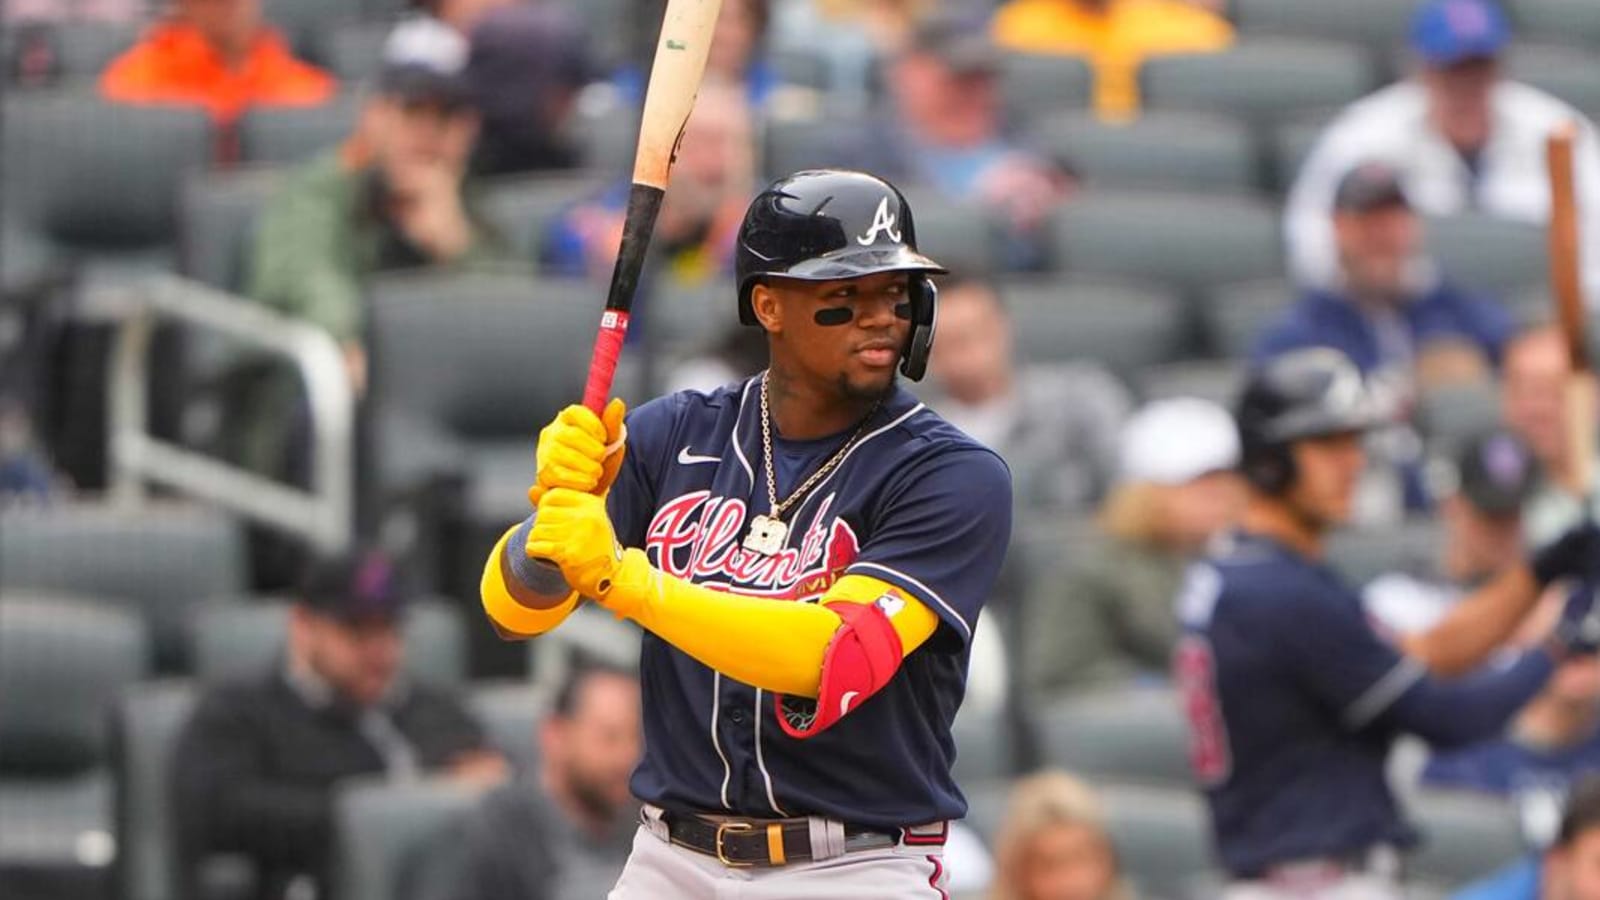 WATCH: Ronald Acuña Jr. throws out runner at third with right